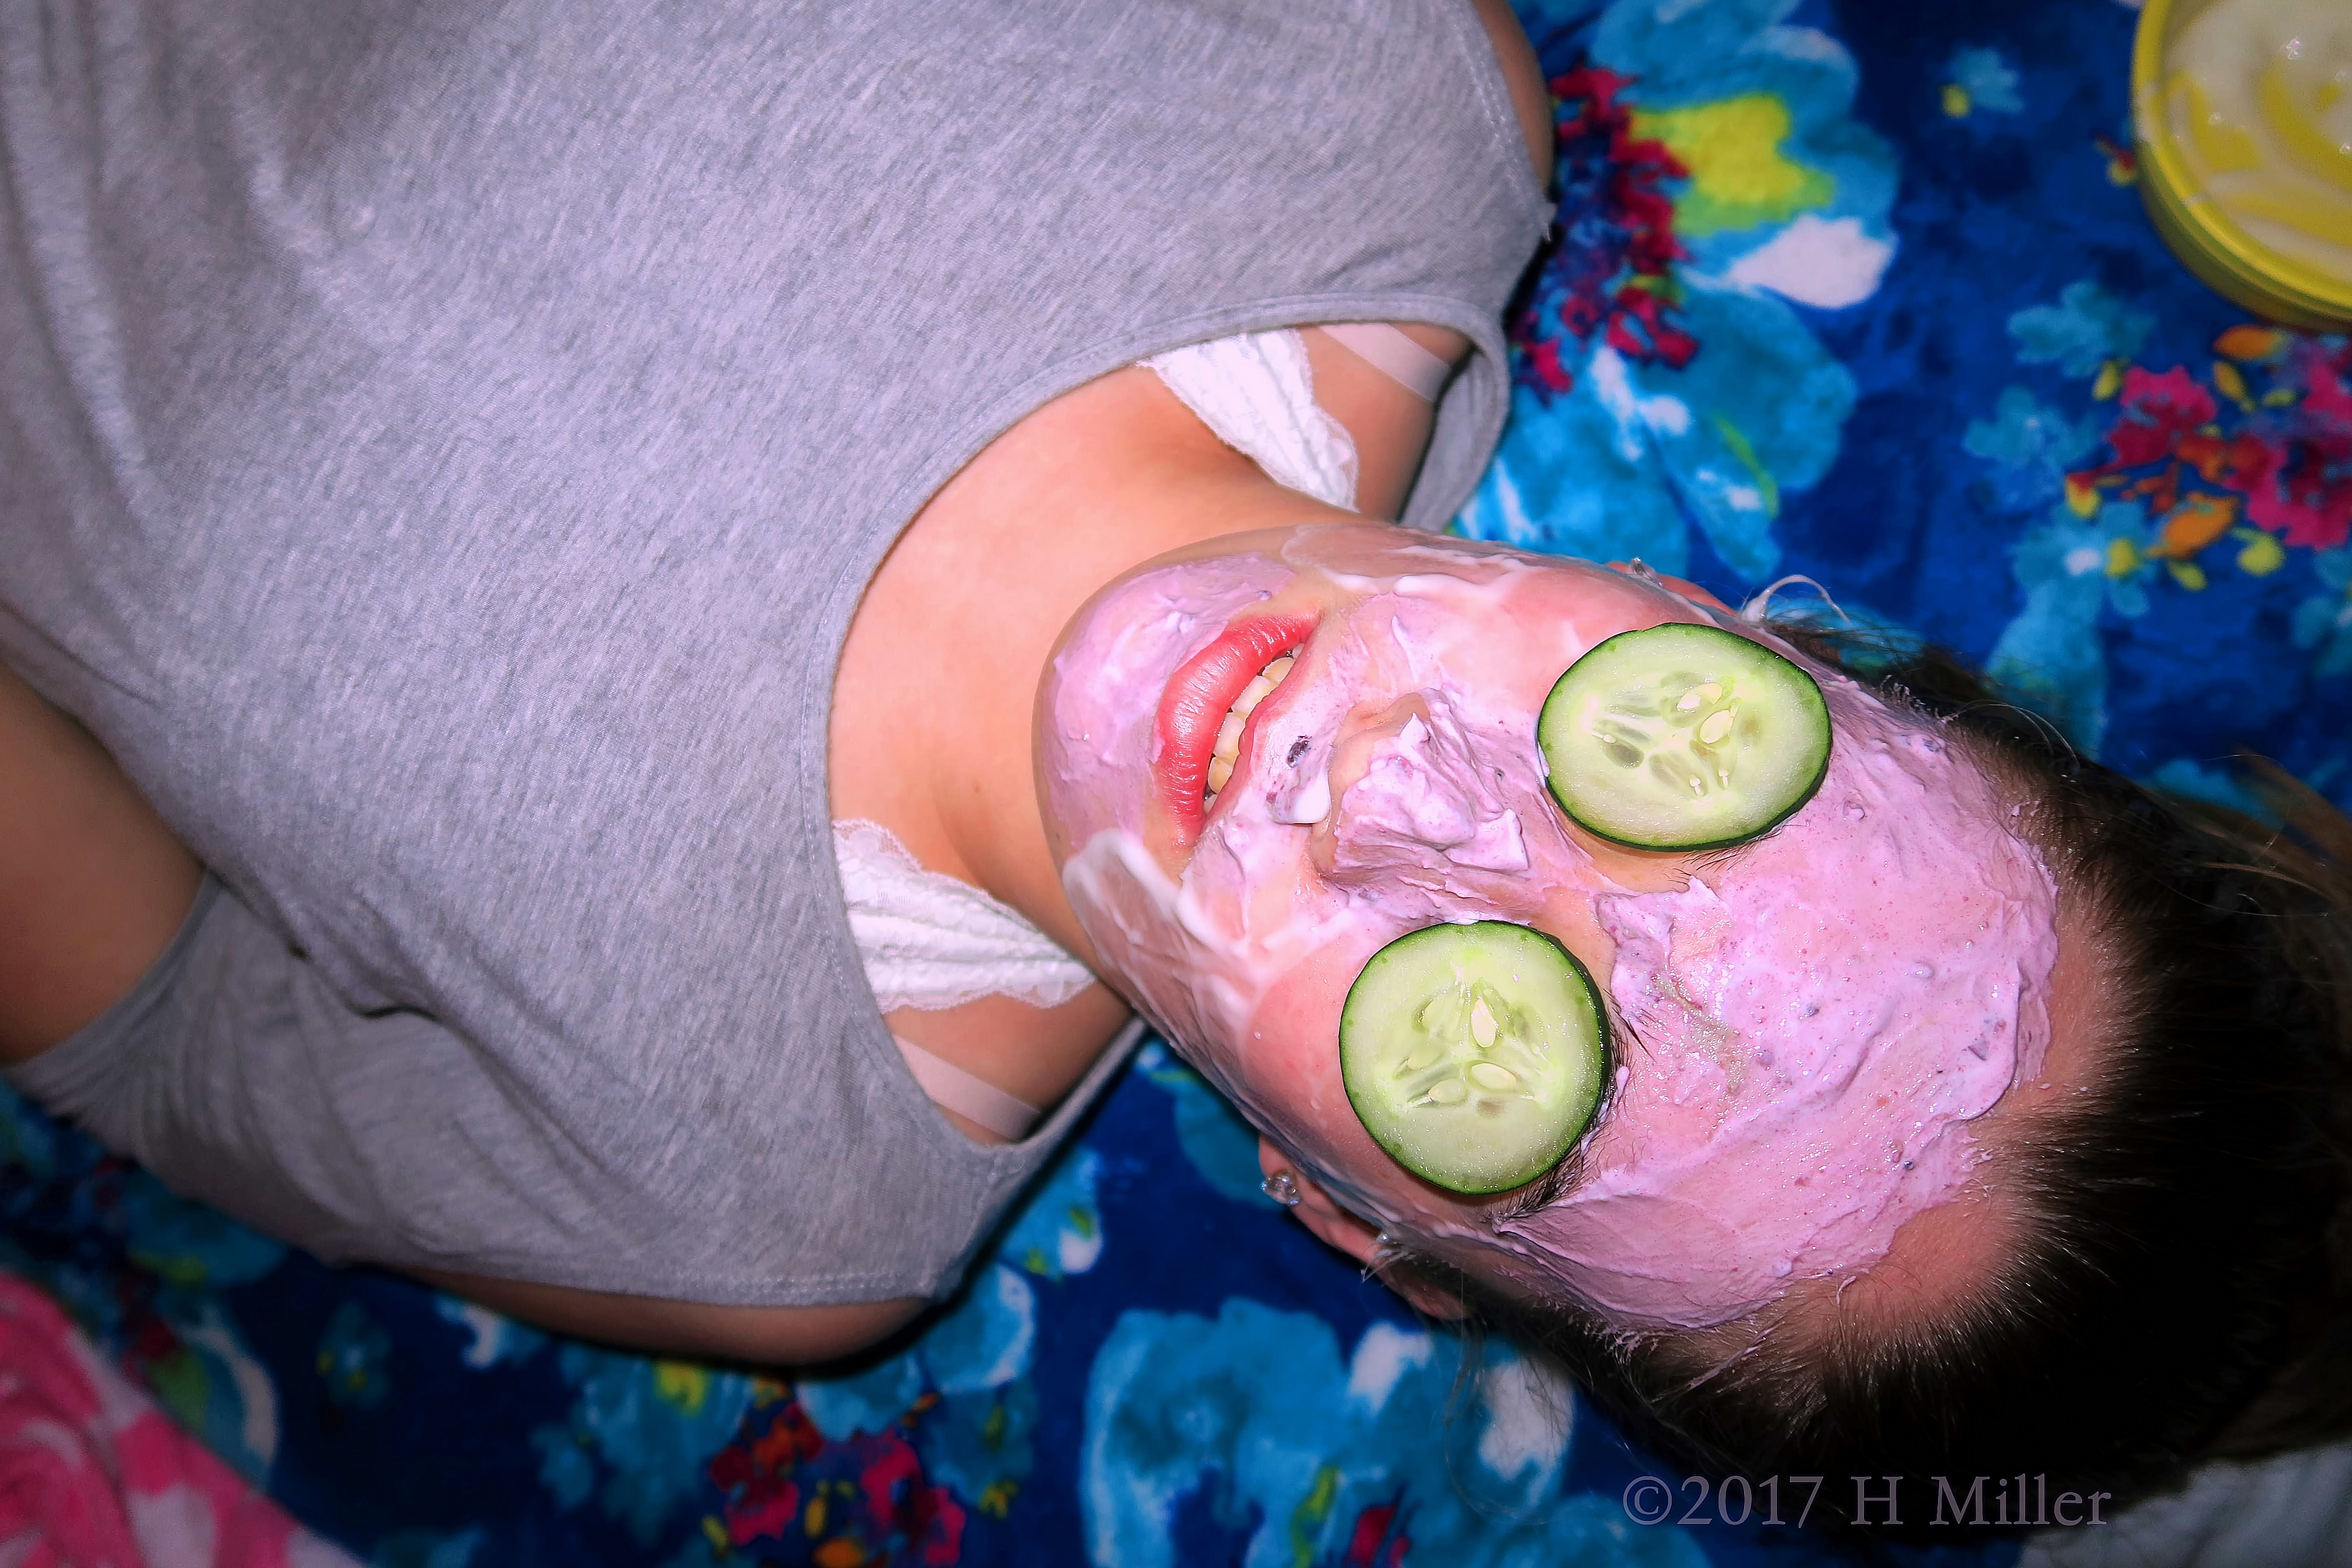 She Is Having A Strawberry Girls Facial With Cucumber On Her Eyes! 4